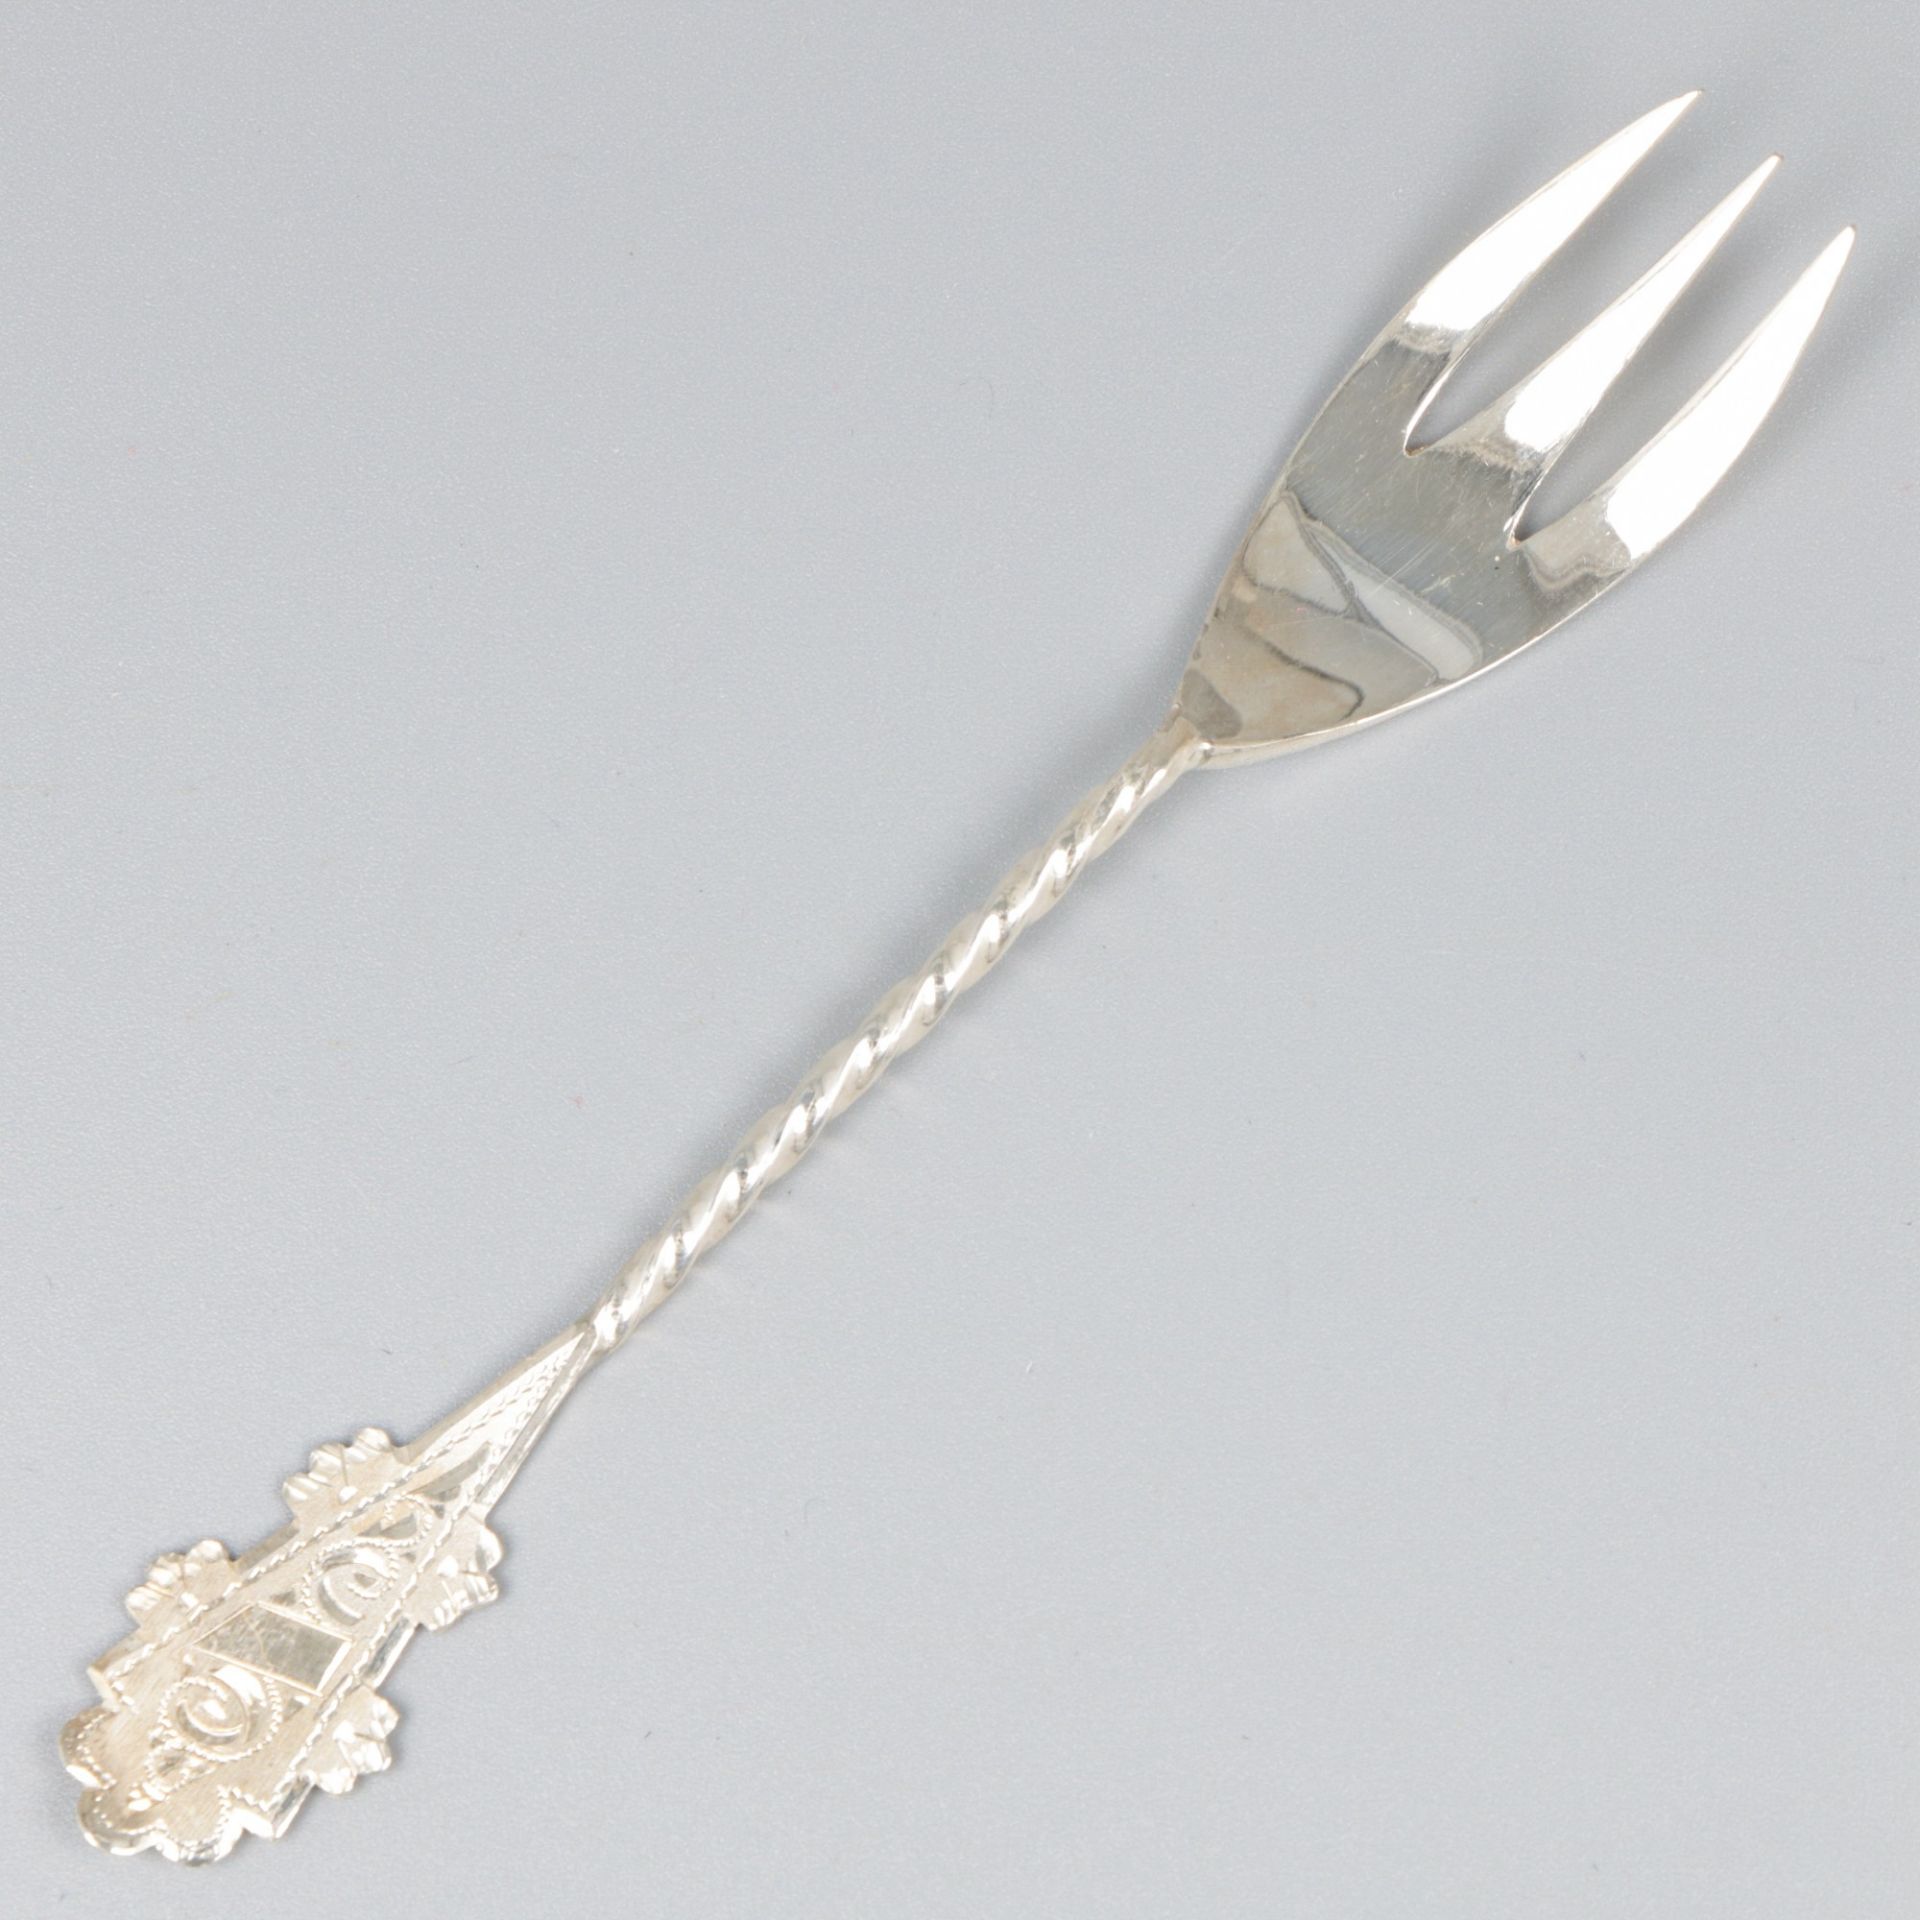 6-piece set of cake / pastry forks silver. - Image 5 of 9